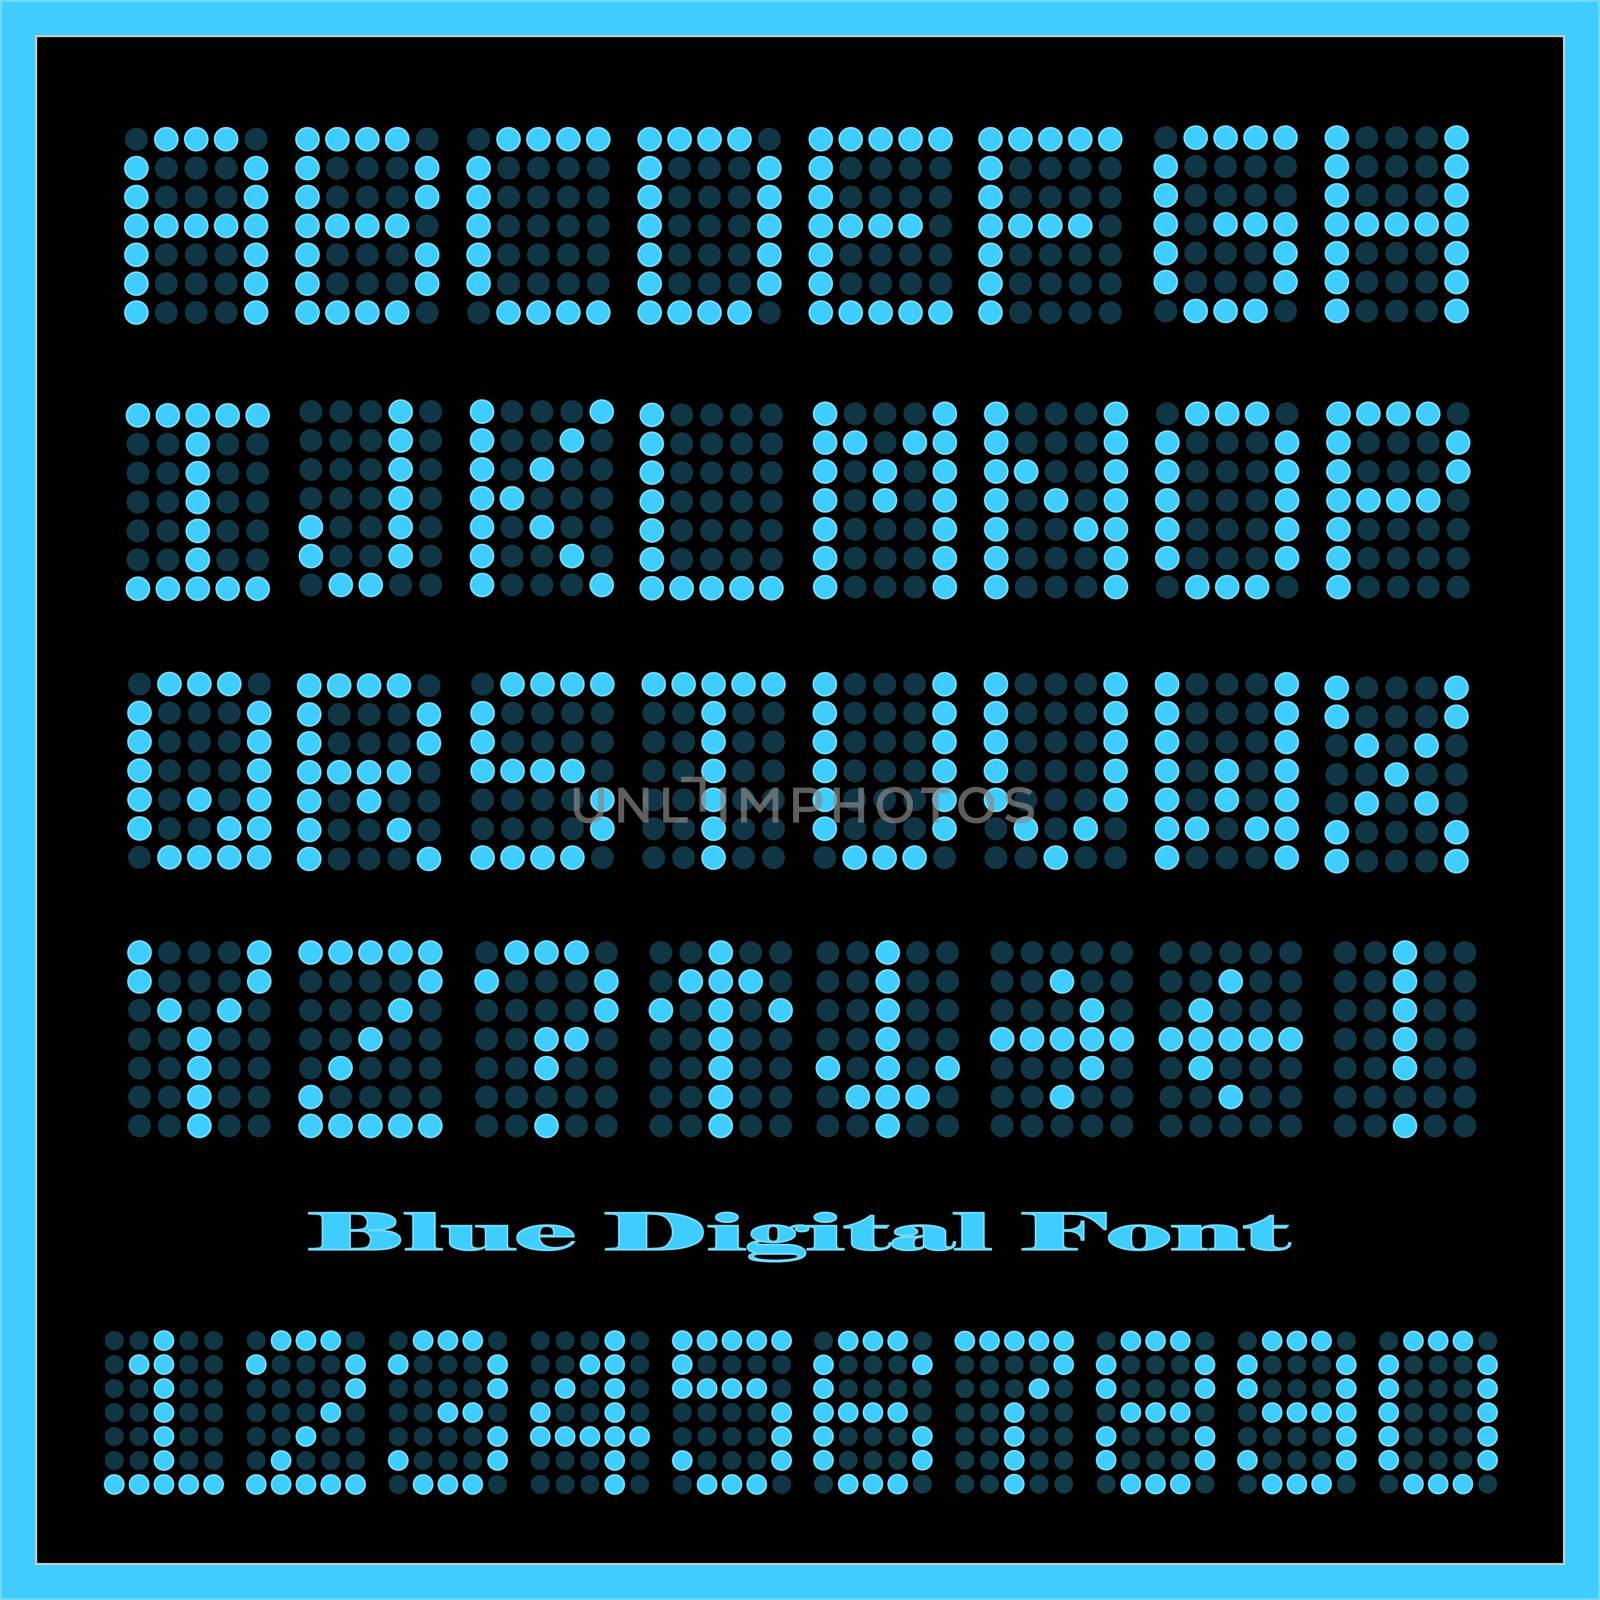 Image of a set of colorful blue alphabetic and numeric characters.